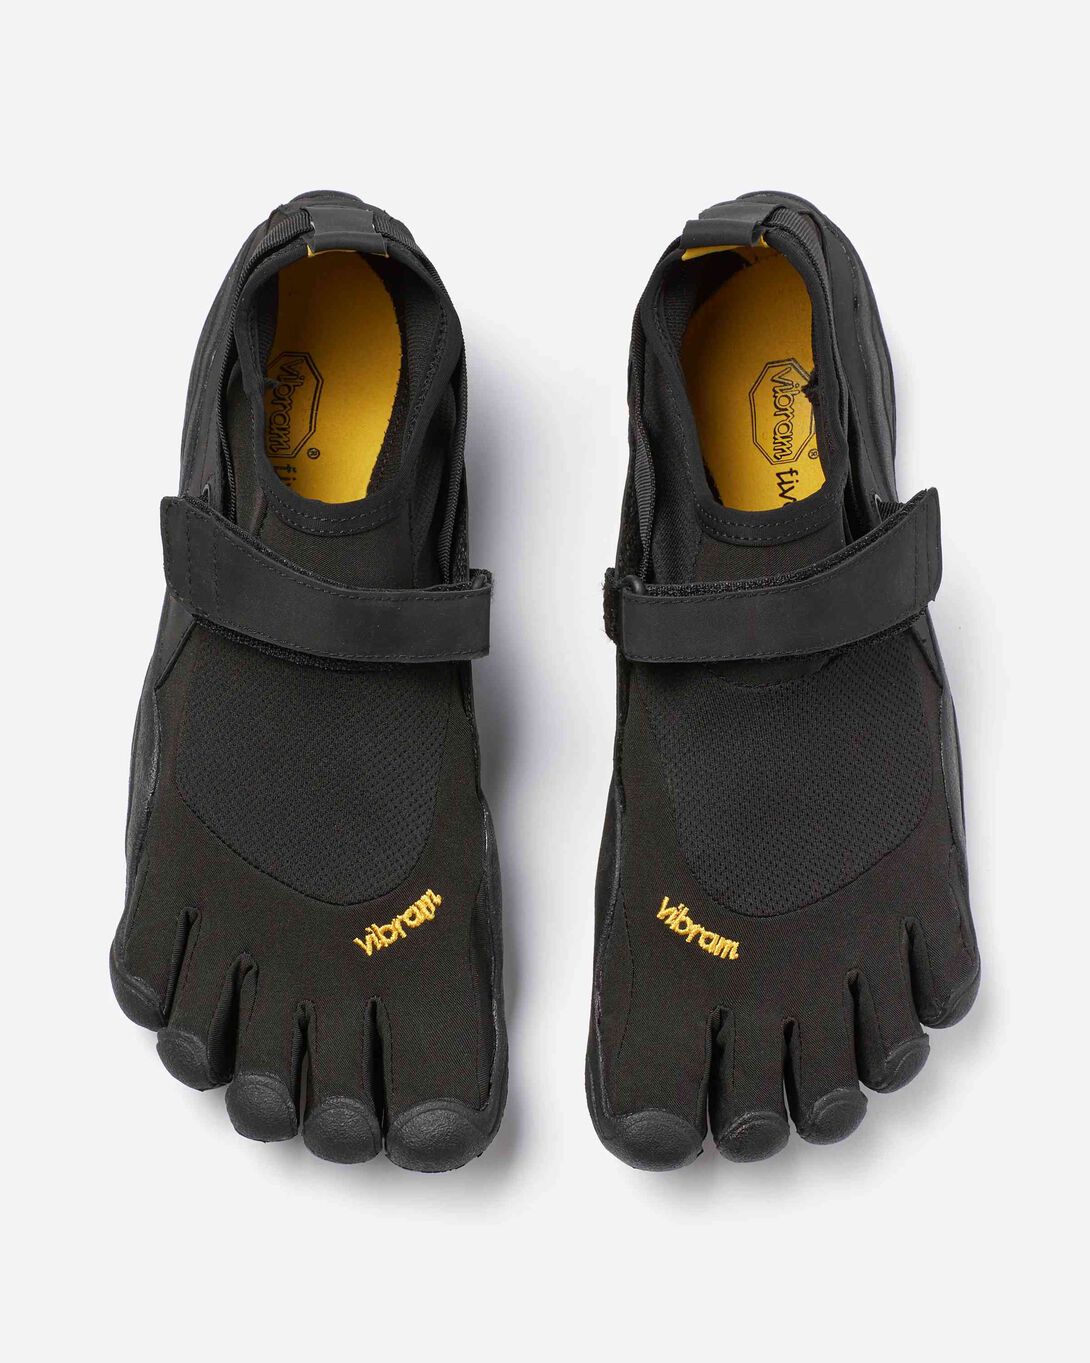 Vibram Fivefingers KSO XS Five Fingers Shoes Walking Hiking Trekking  Outdoor Wet Traction Sneakers Urban Playground Climb